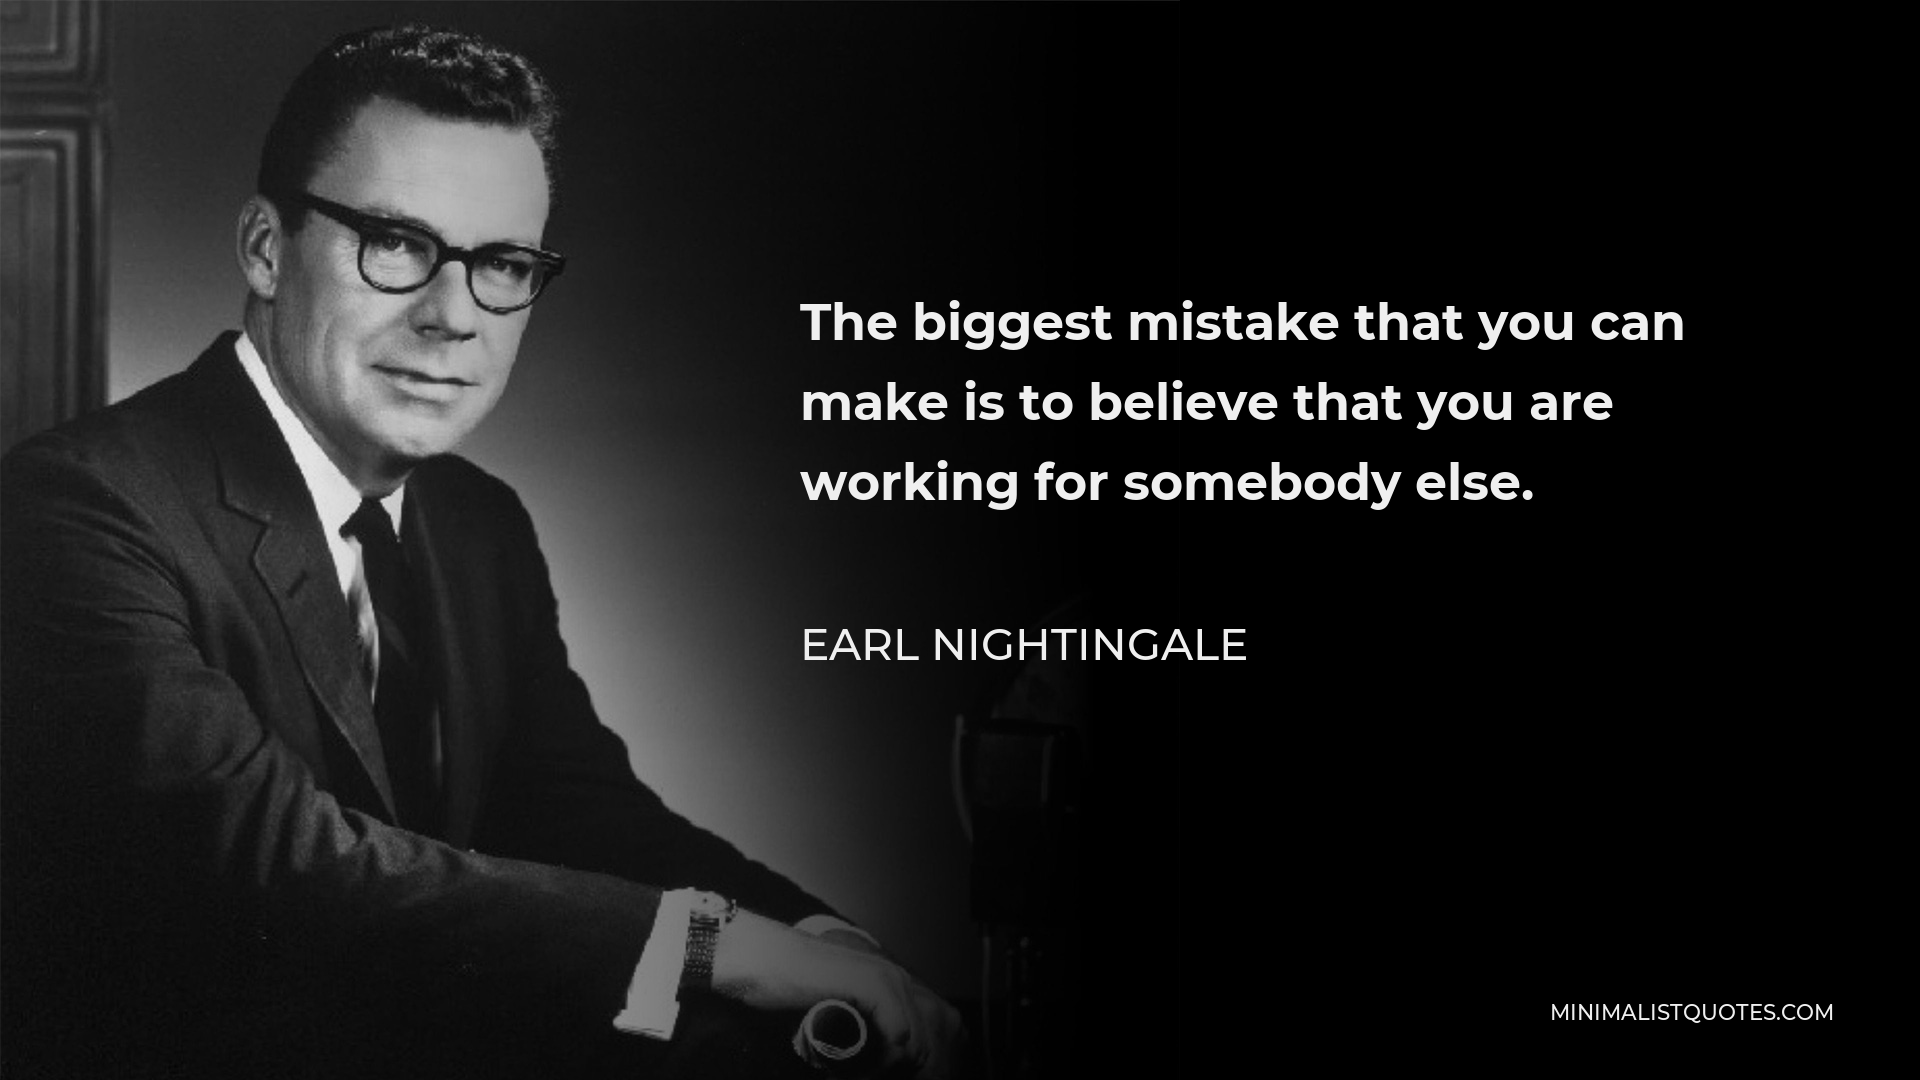 Earl Nightingale Quote - The biggest mistake that you can make is to believe that you are working for somebody else.